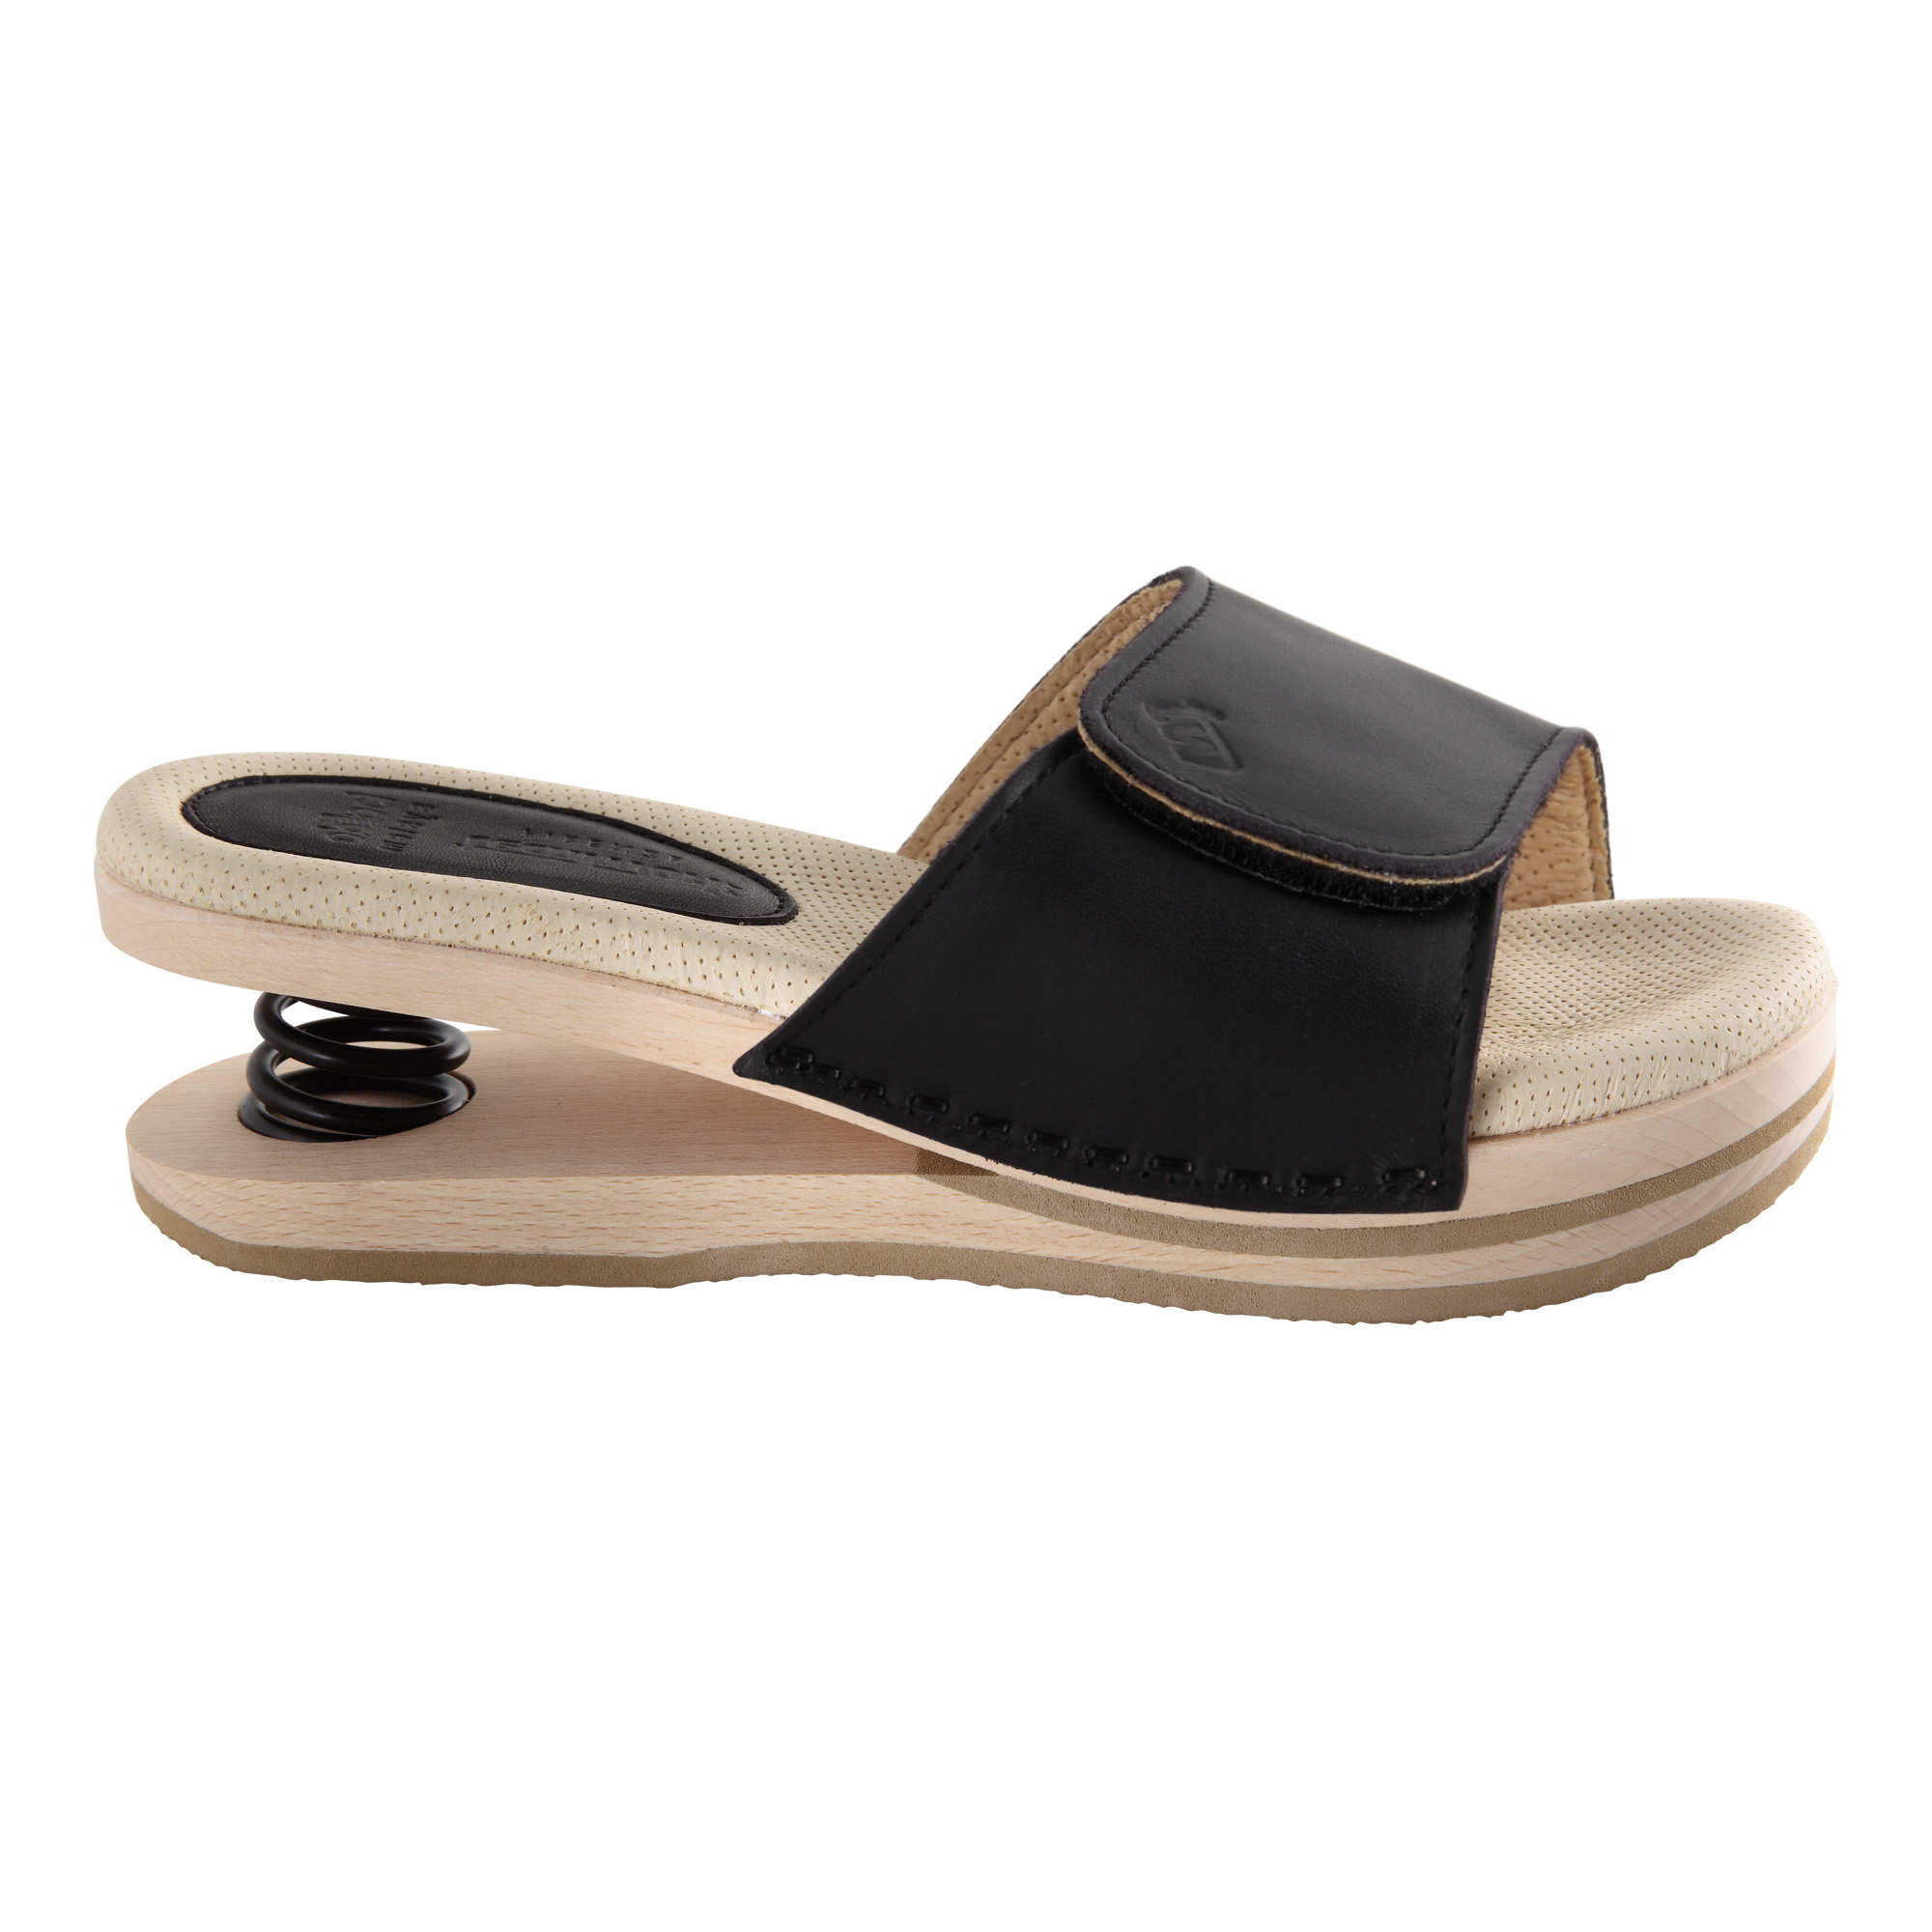 Relax open clogs with black spring